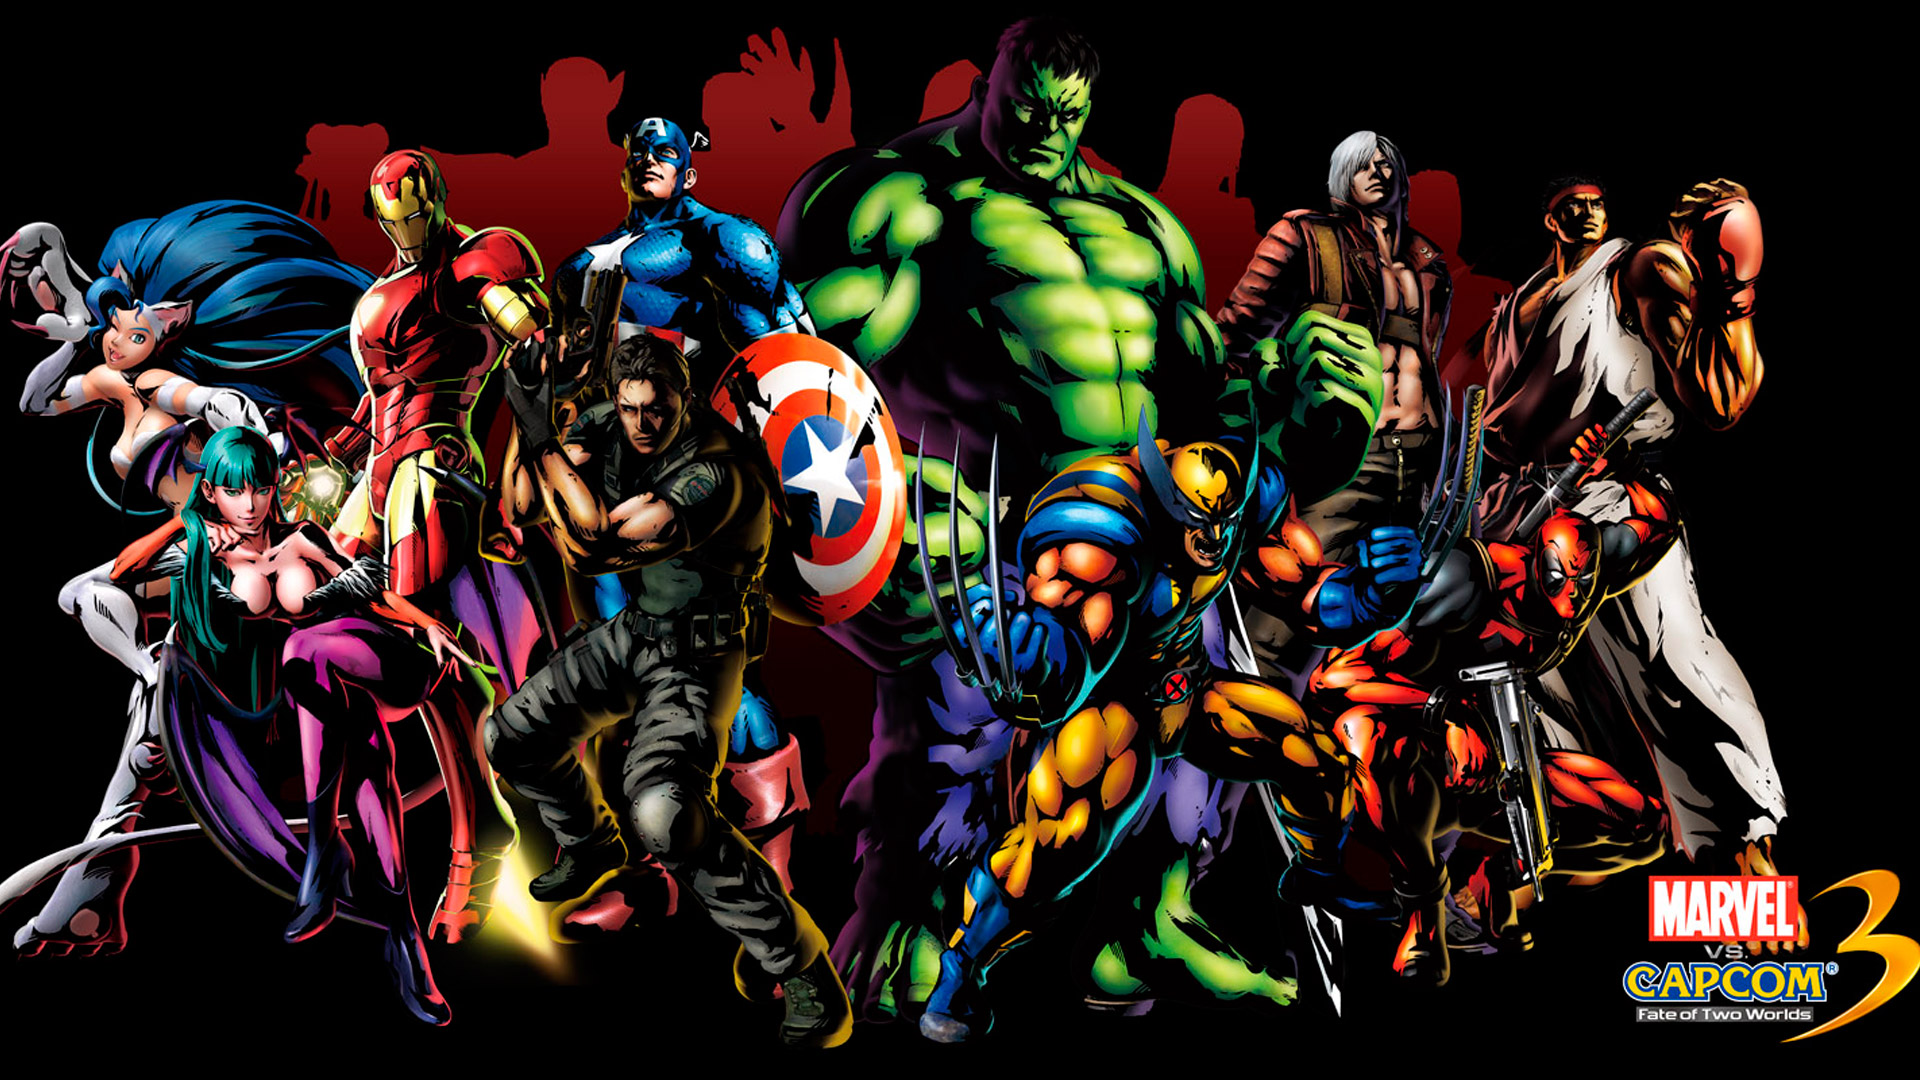 Video Game Marvel Vs Capcom 3 Fate Of Two Worlds 1920x1080